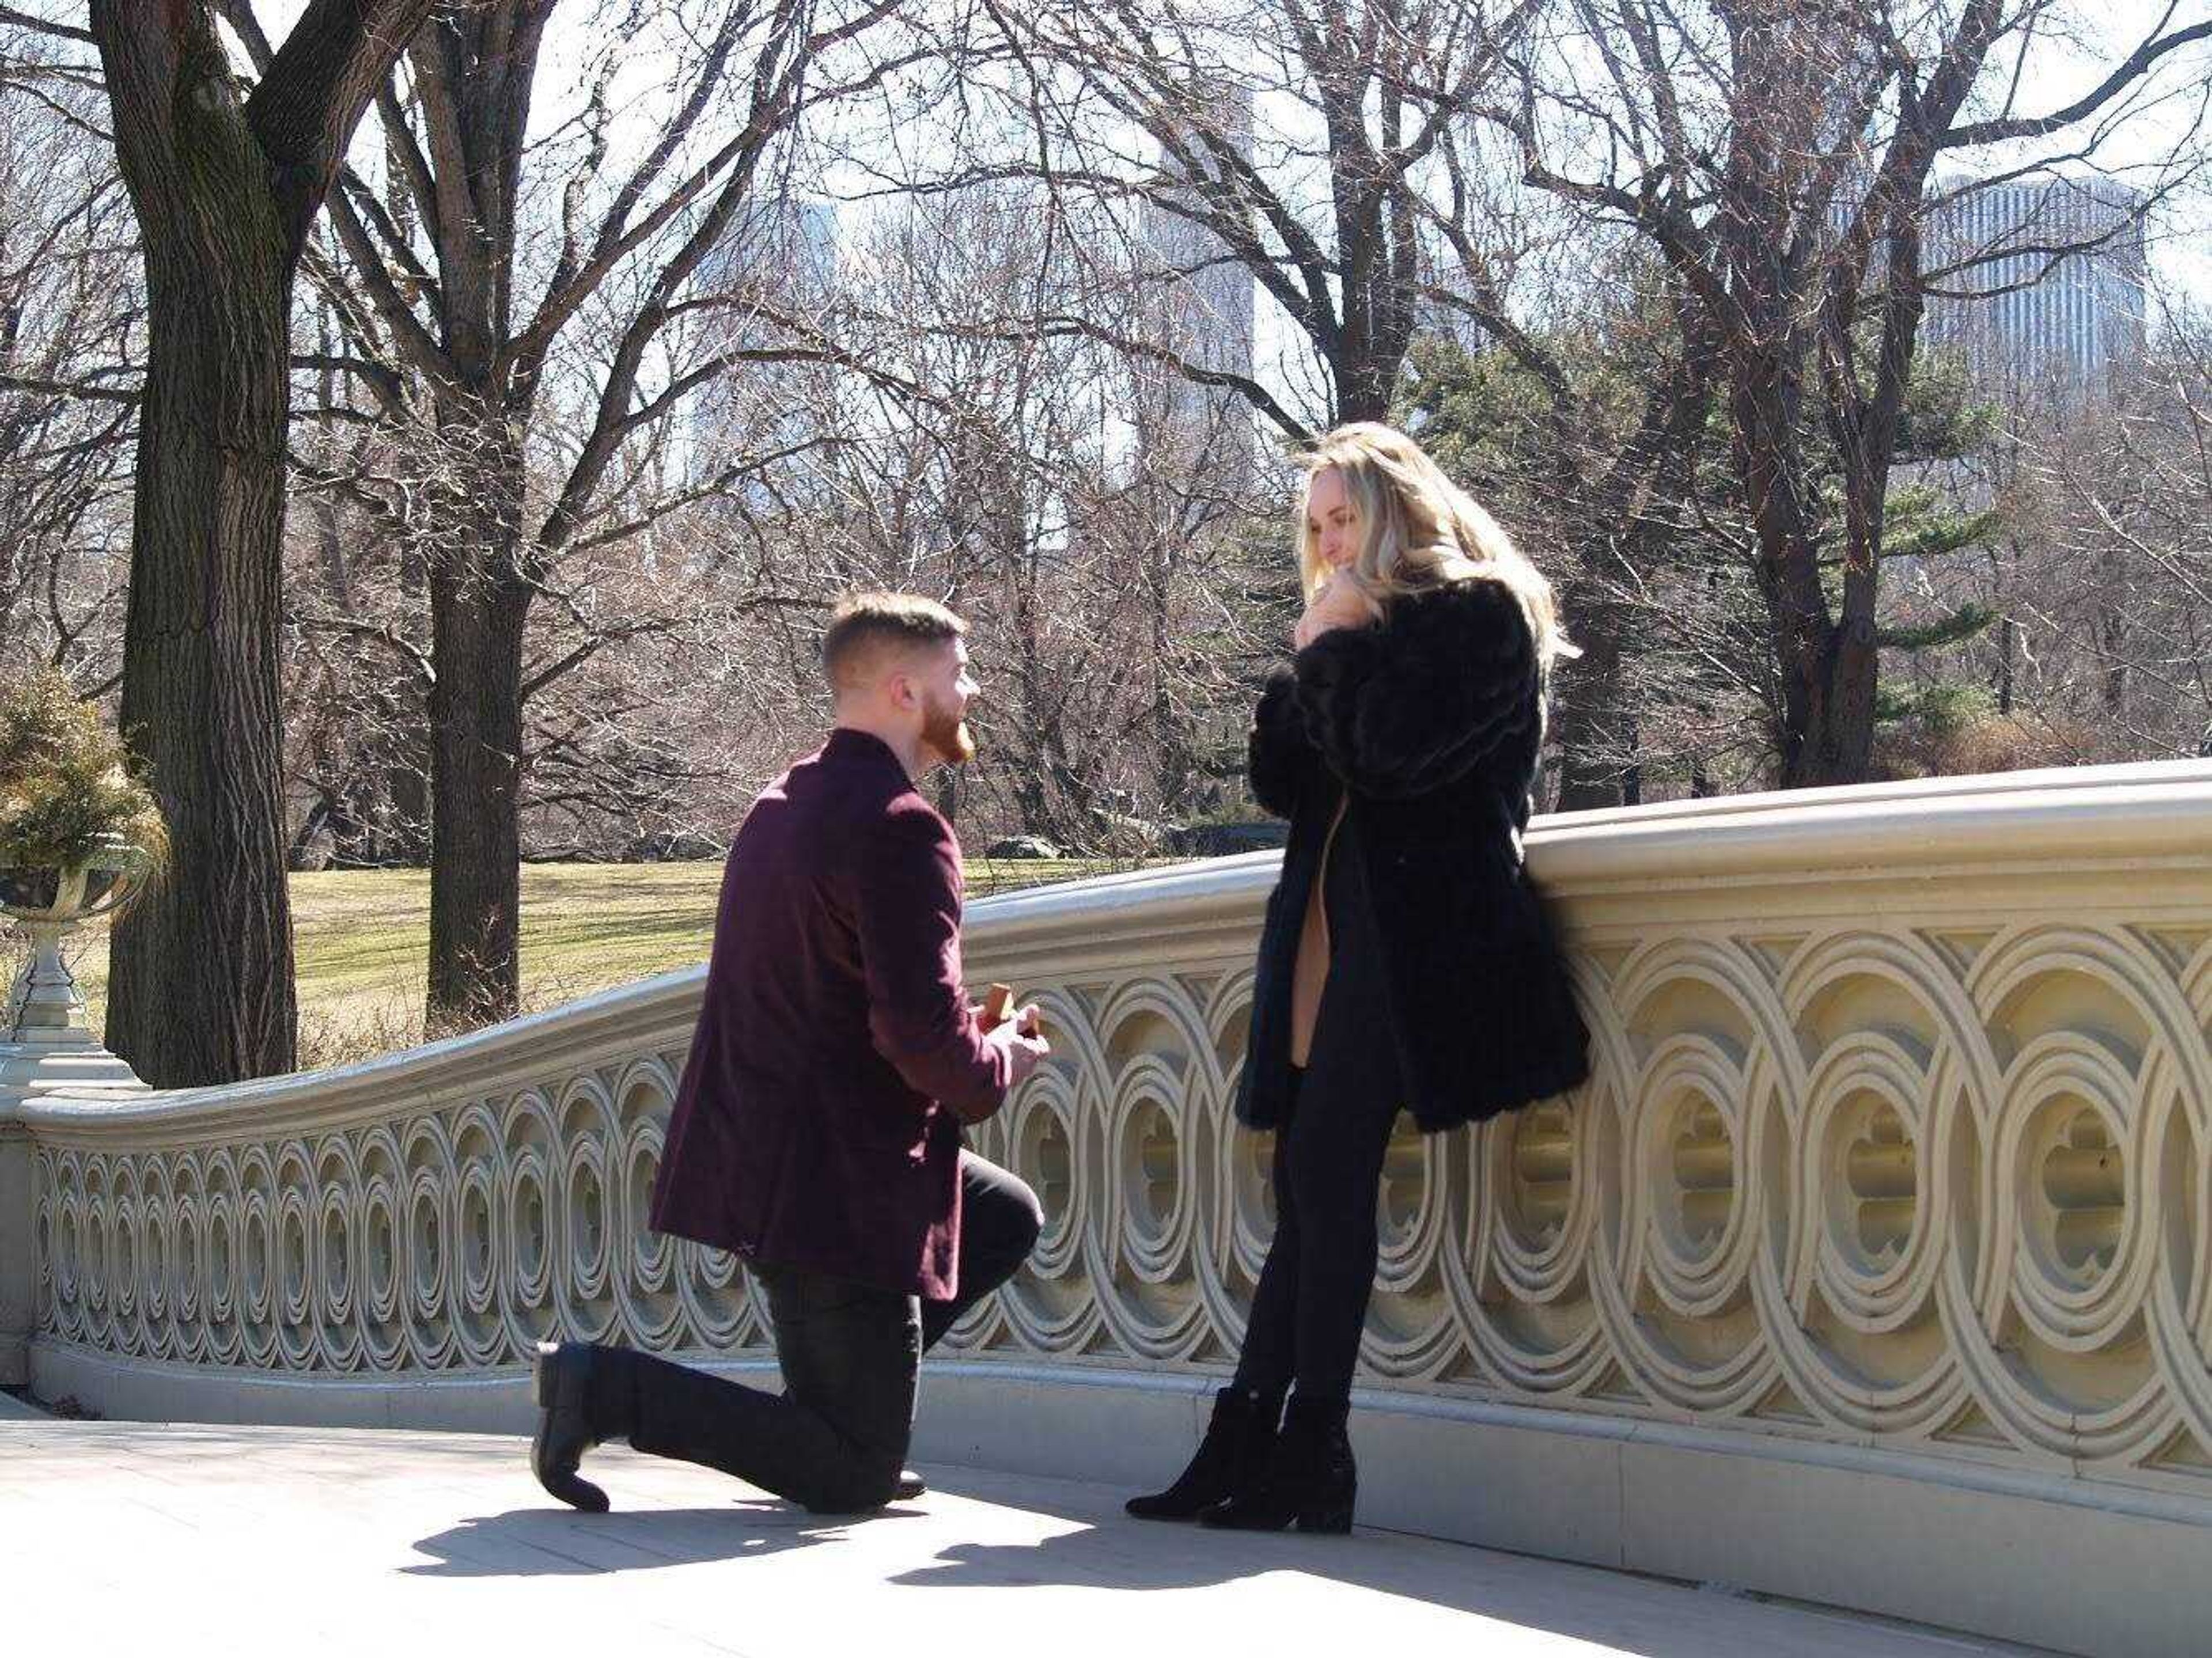 Collin Bentley proposes to Midori White on March 17, 2019 in New York City.